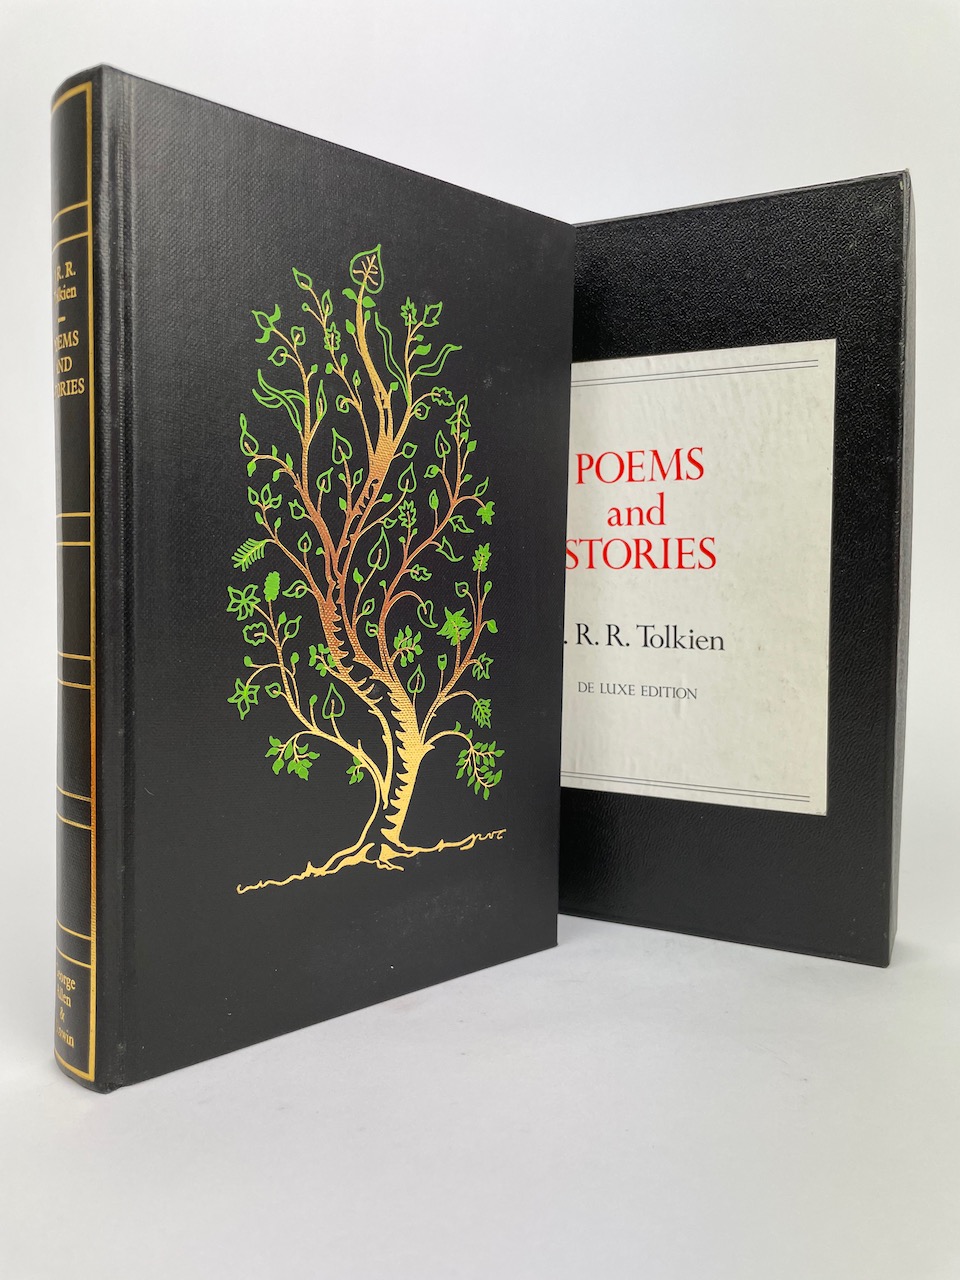 Poems and Stories by J.R.R. Tolkien, The UK De Luxe India Paper Edition 